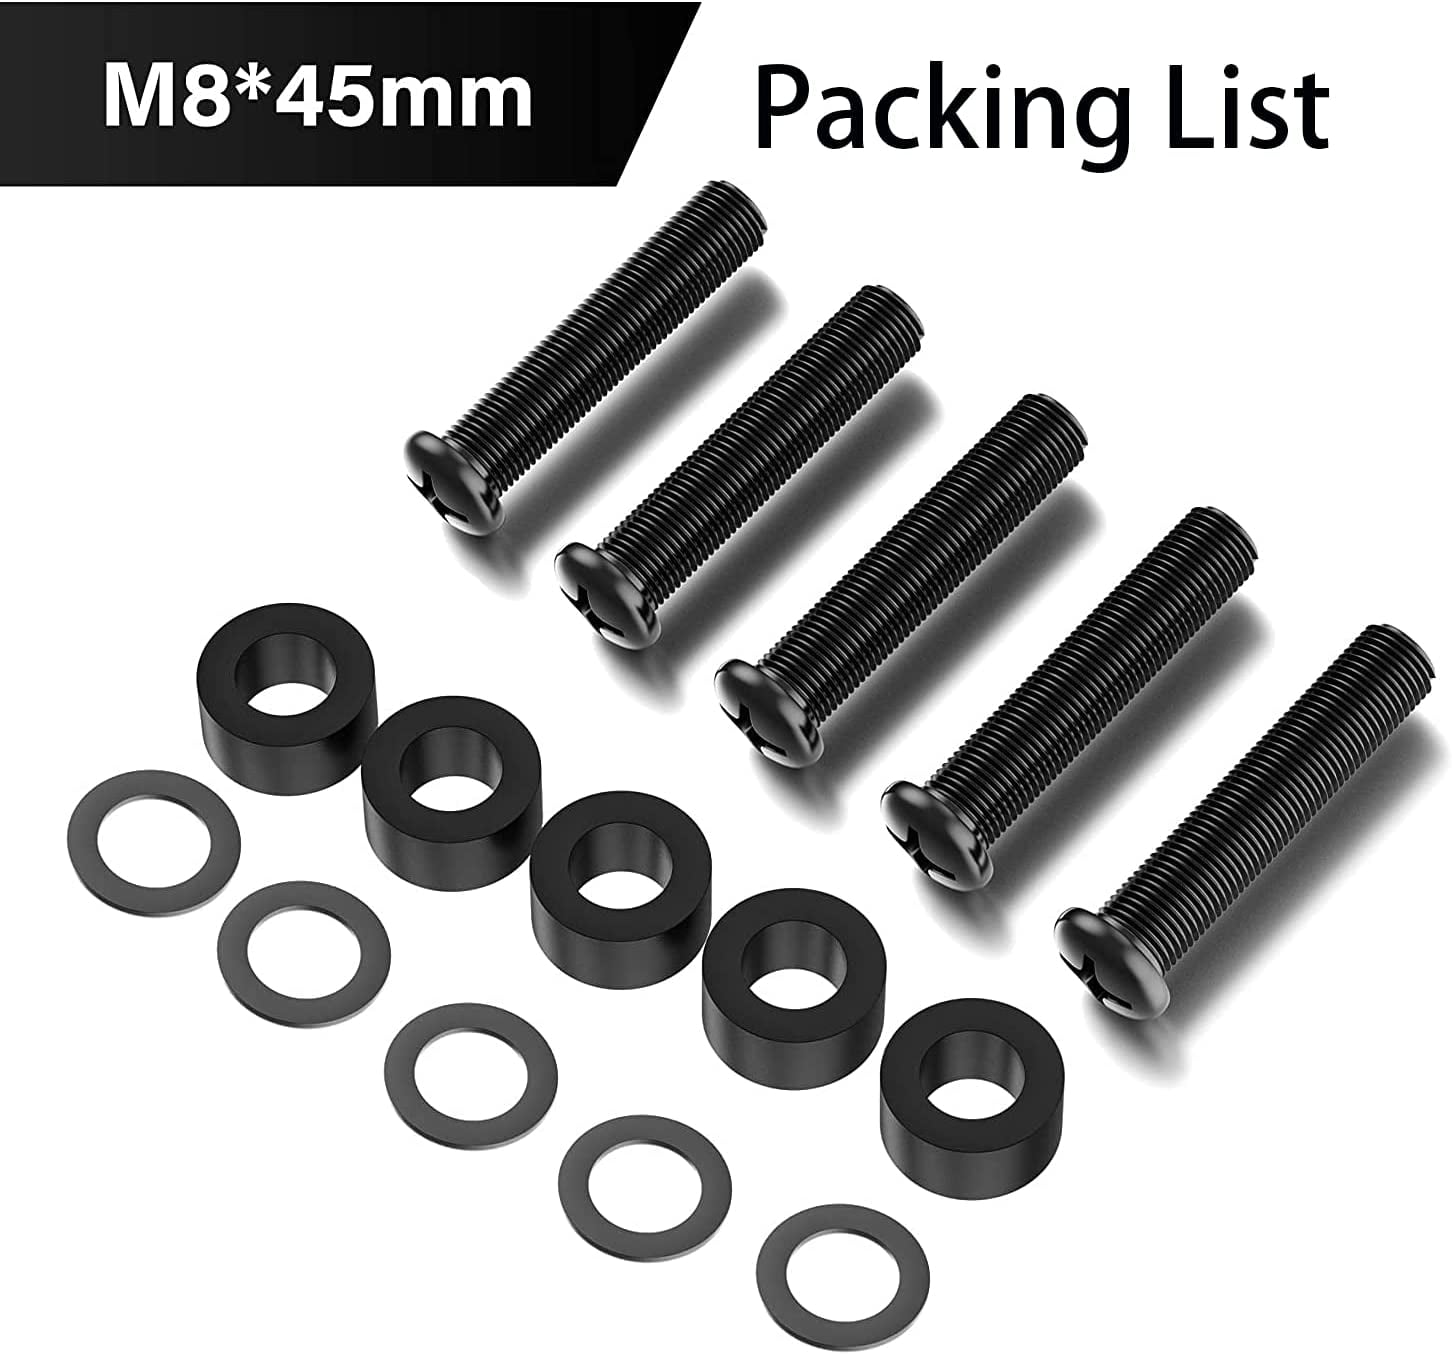 M8 x 45mm VESA Mount Screws Bolts and Washers for Samsung Curved LCD TV  Screws, for LG/Vizio/Philips/Sony Bravia